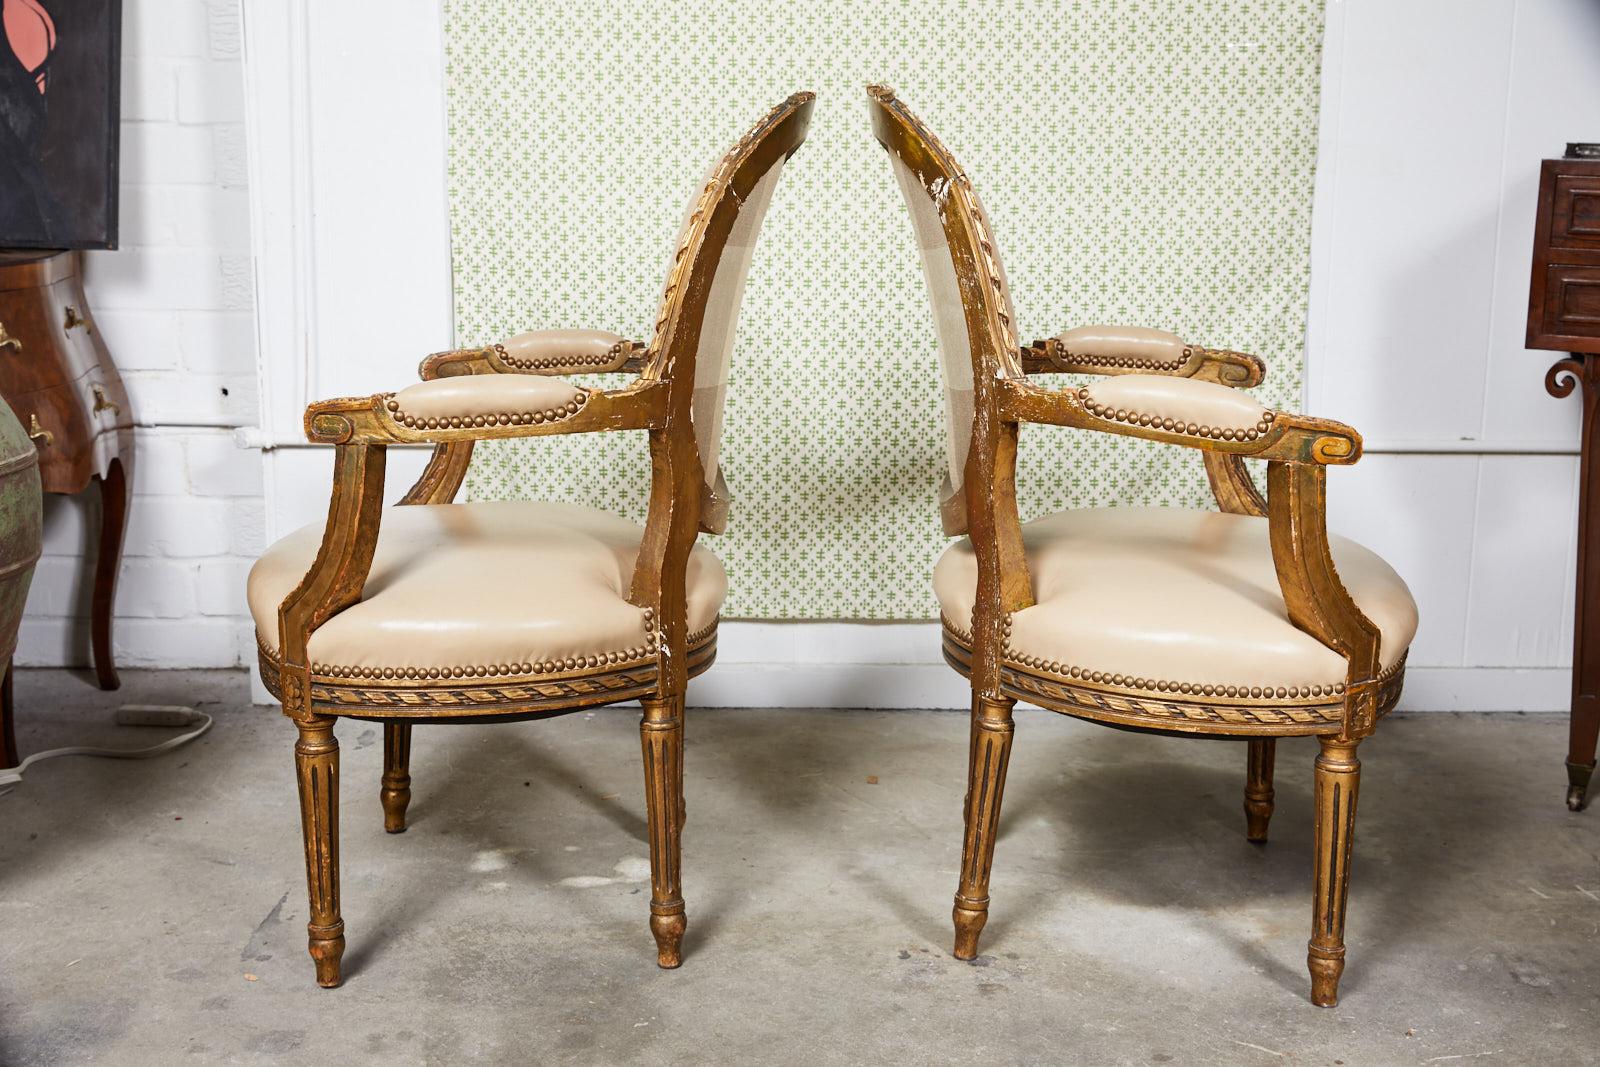 Pair of French Louis XVI Style Gilded Fauteuils In Good Condition For Sale In Atlanta, GA